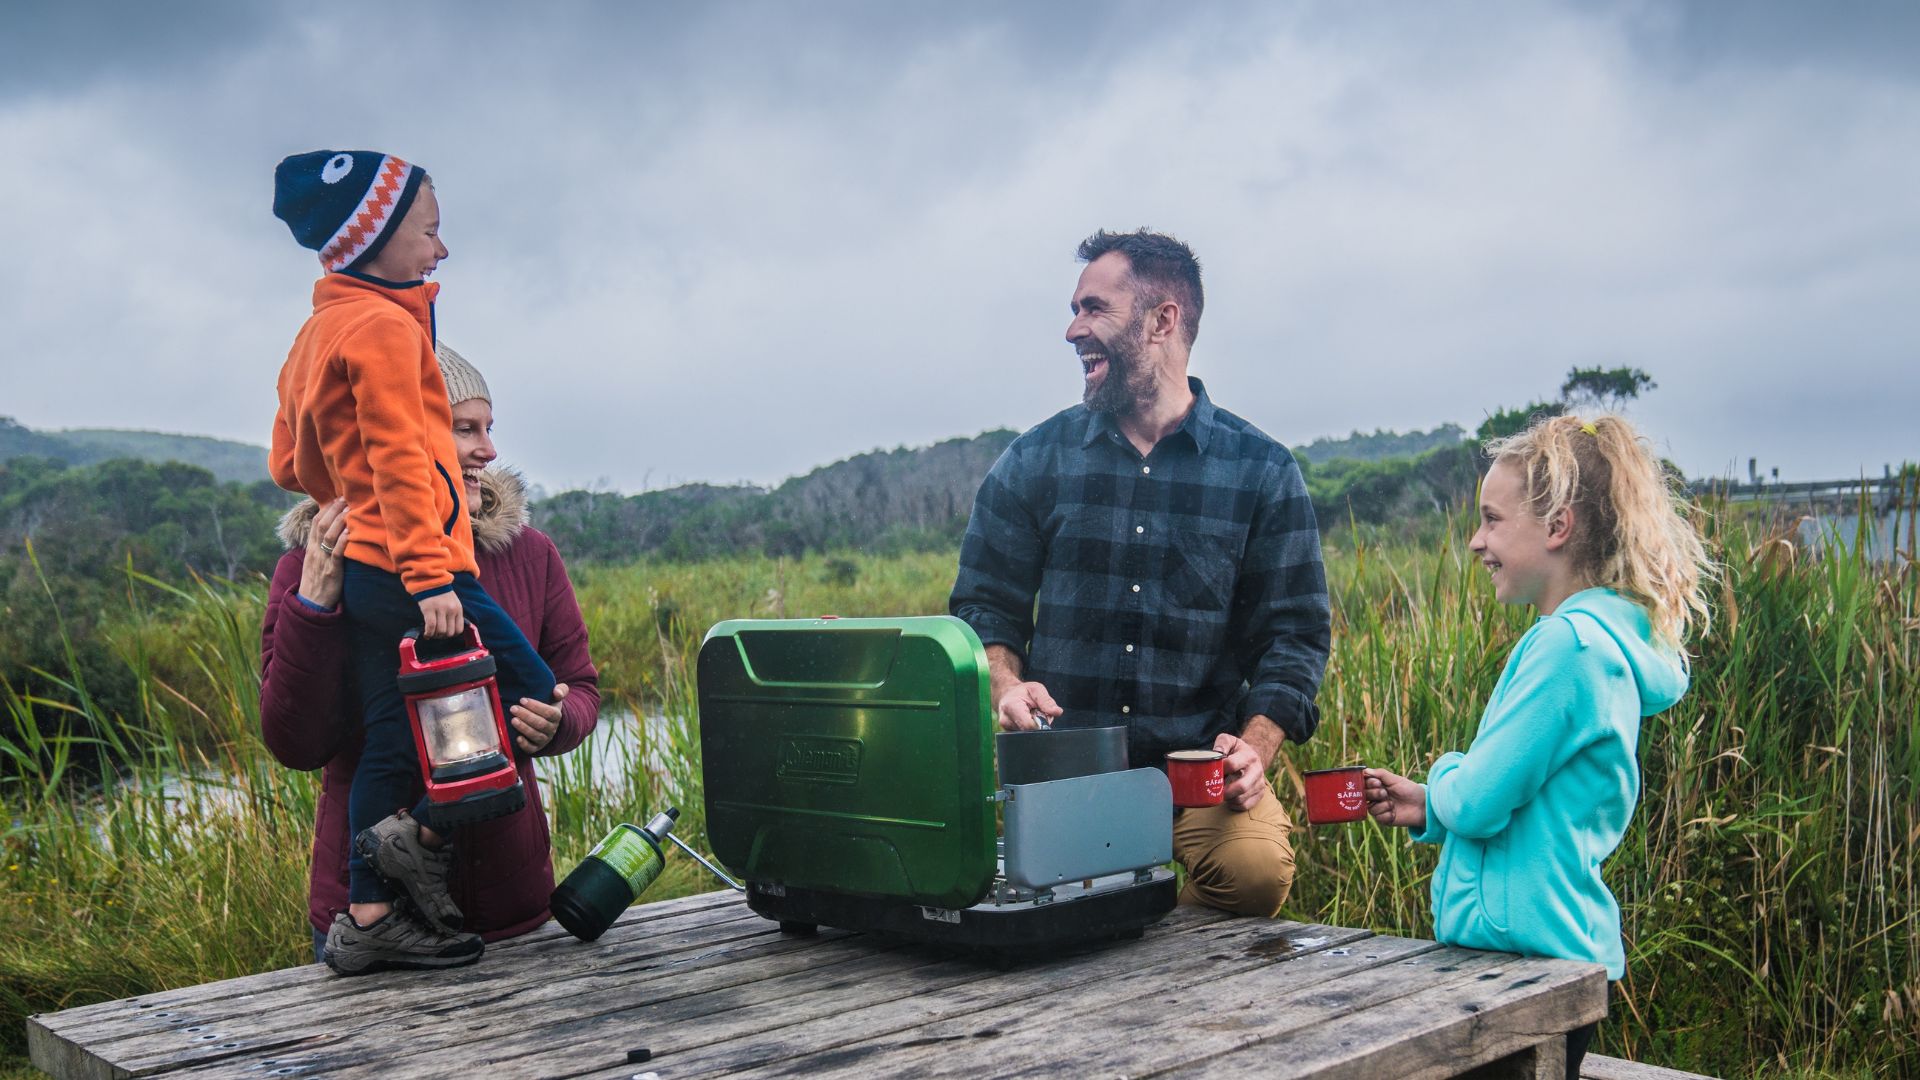 Essential camp cooking gear for your next camping adventure